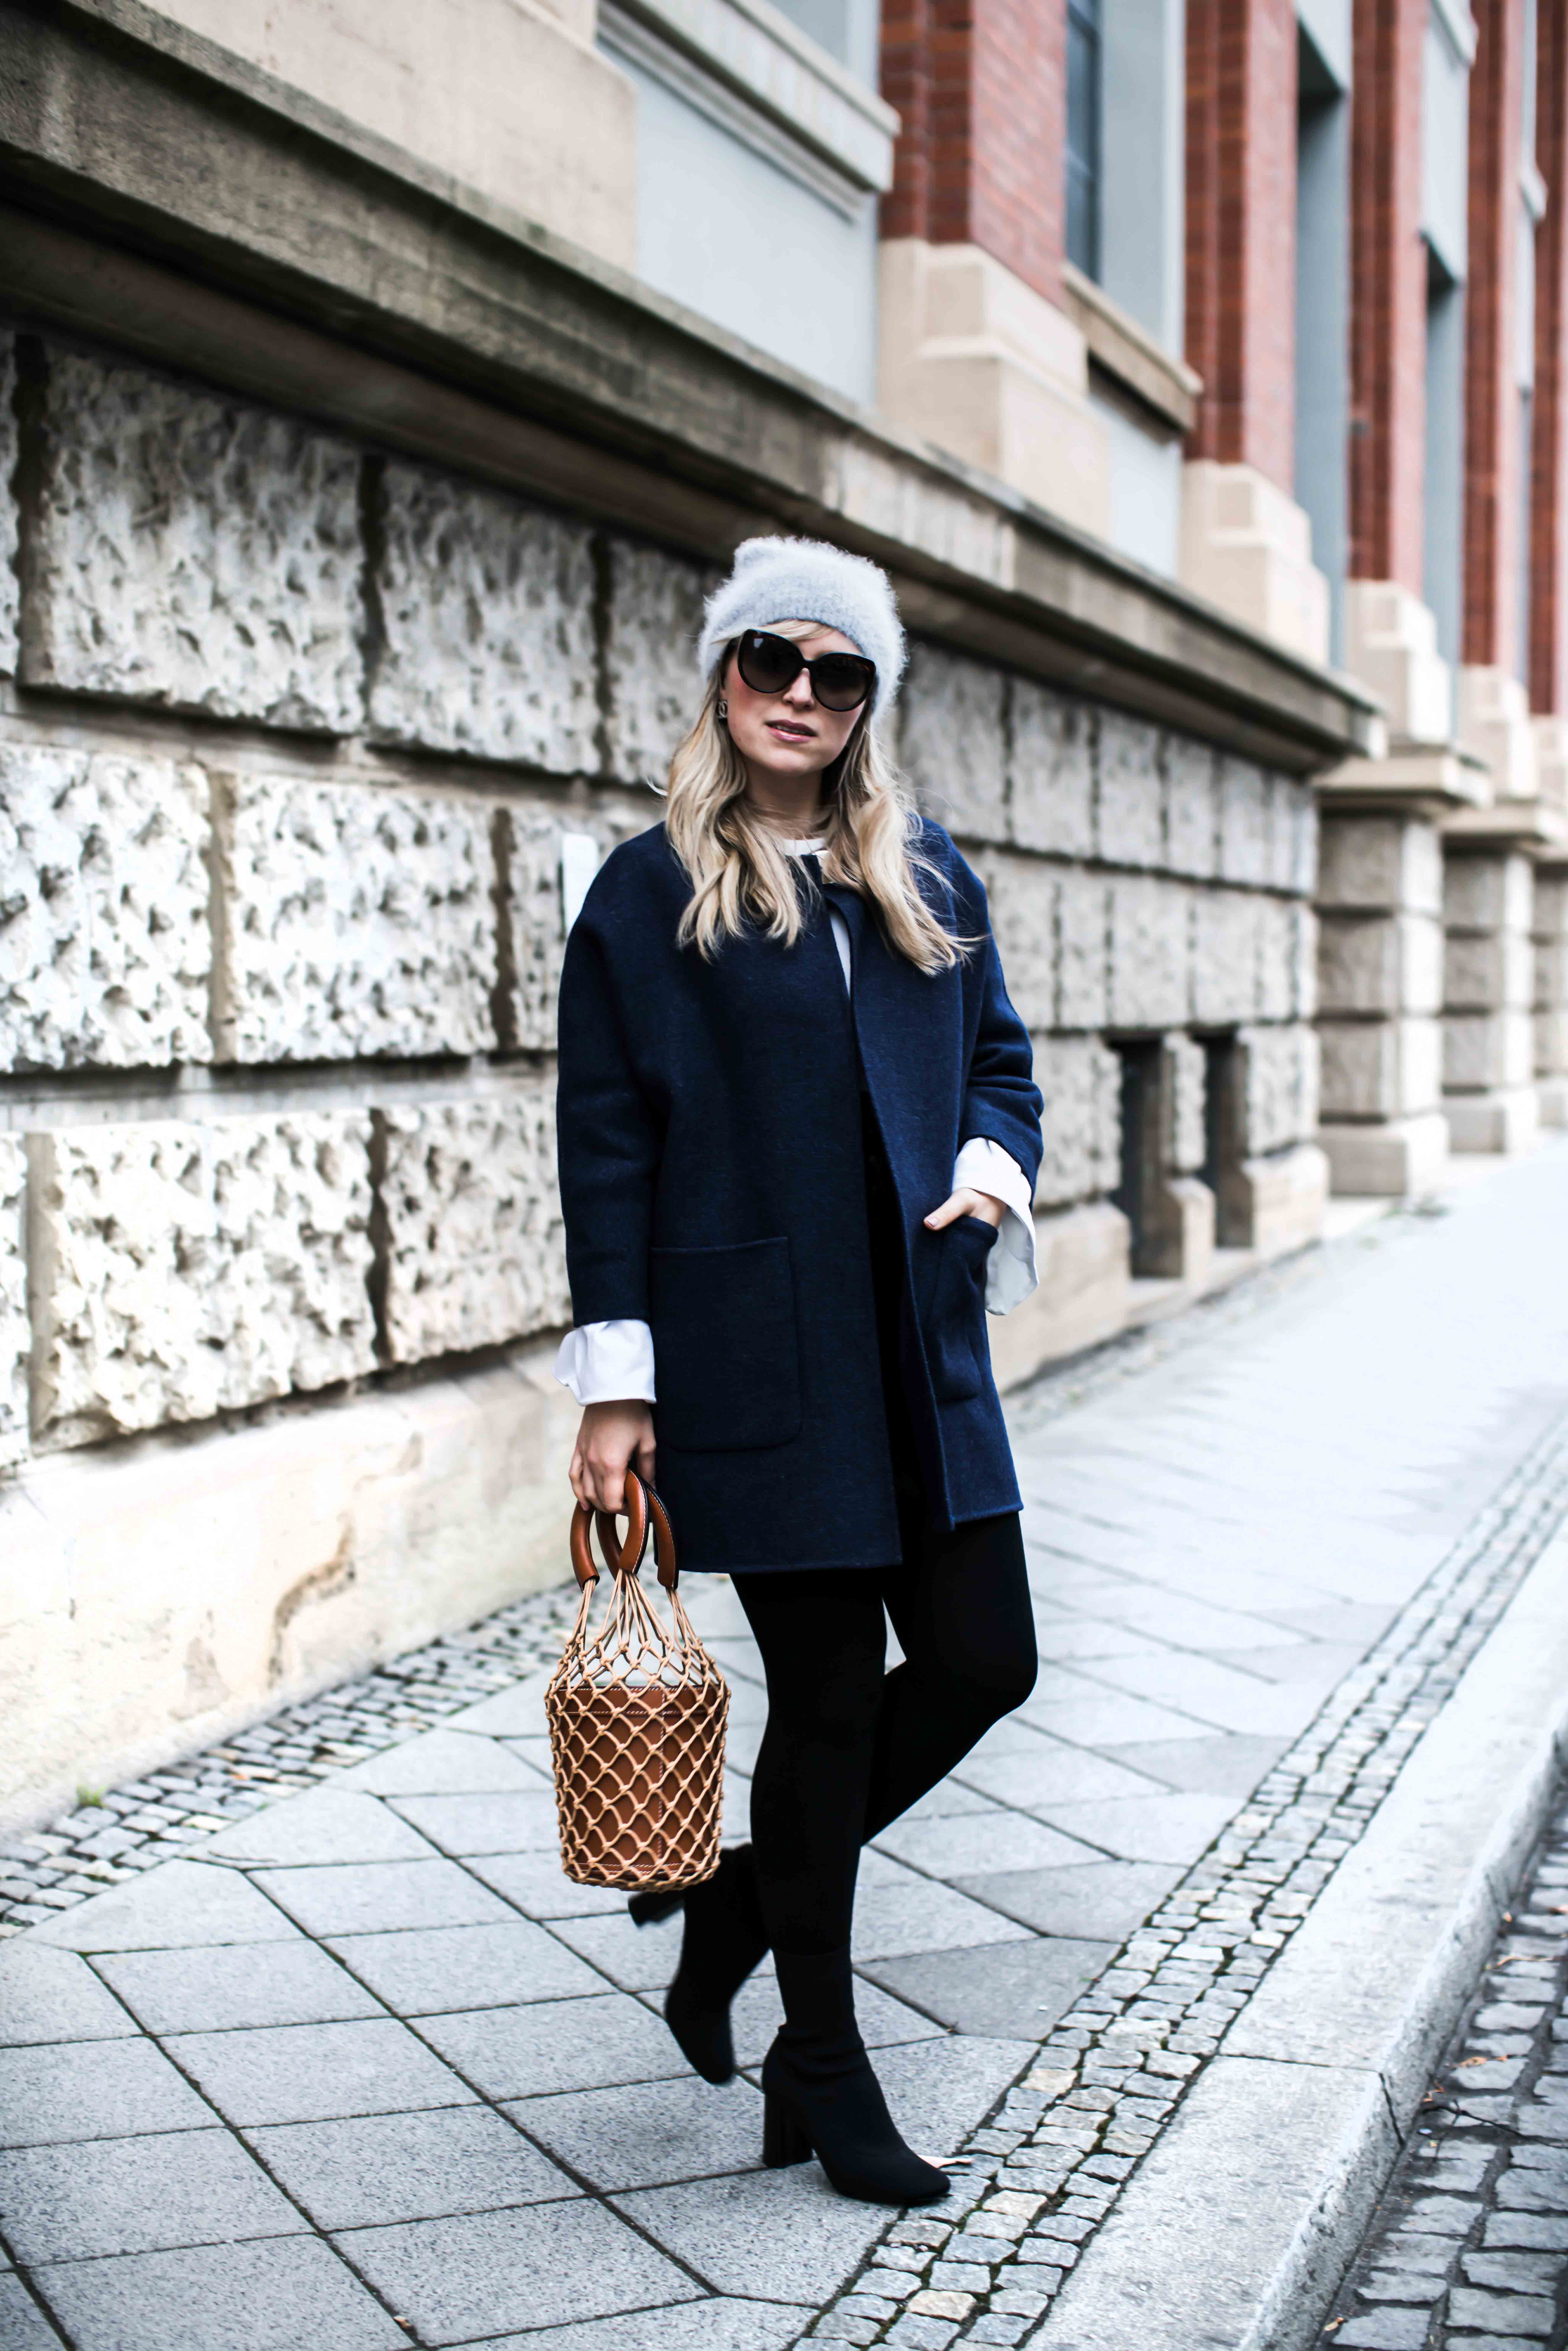 wearing my fave coat and staud bag- und finde dich bitte selbst